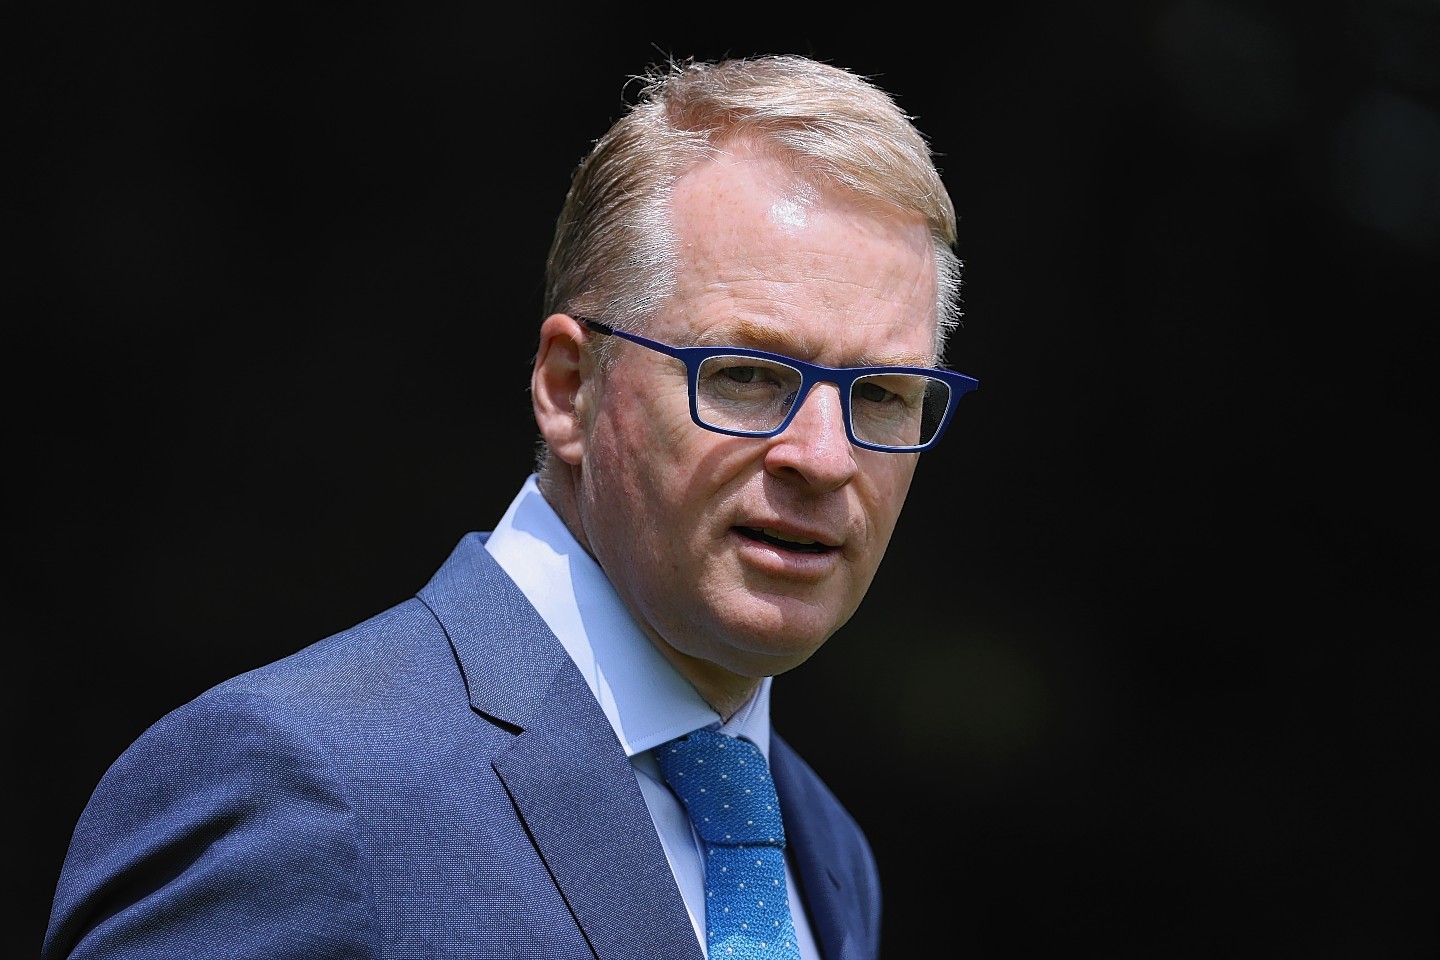 Keith Pelley Not Thrilled With LIV Players At BMW Championship